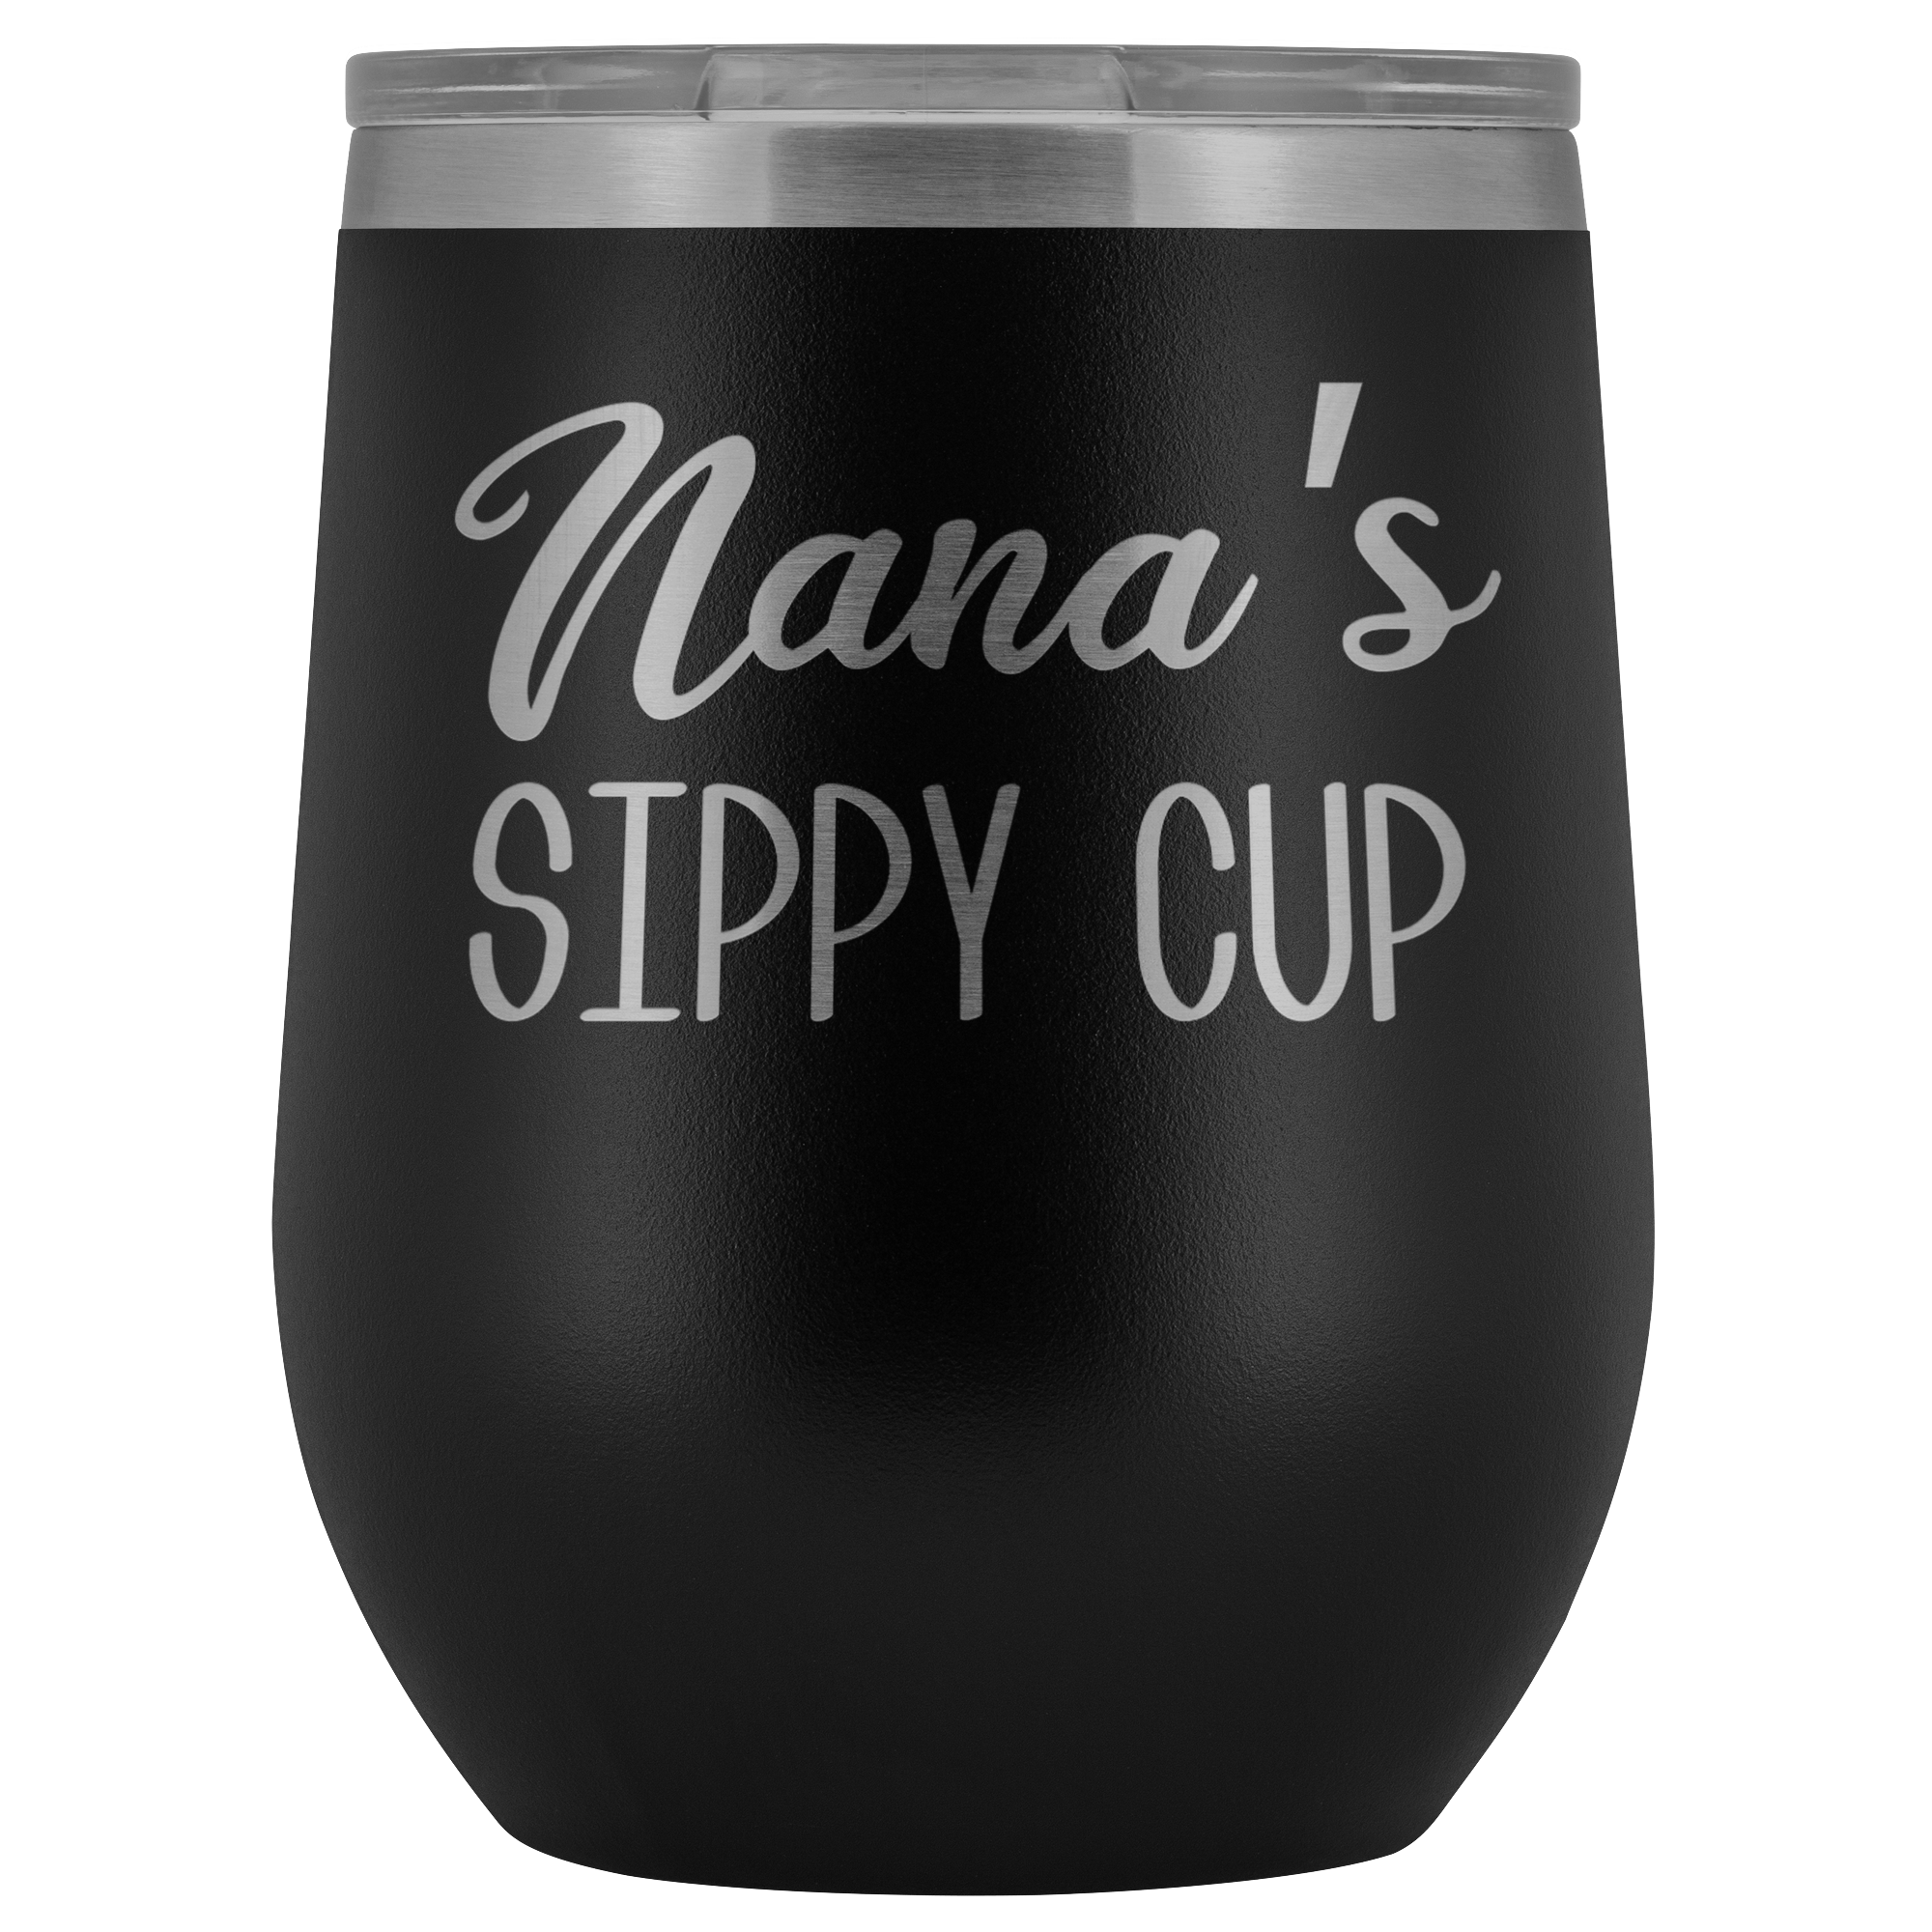 Nana's Sippy Cup Nana Wine Tumbler Gifts for Nanas Funny Stemless Stainless Steel Insulated Tumblers Hot Cold BPA Free 12oz Travel Cup